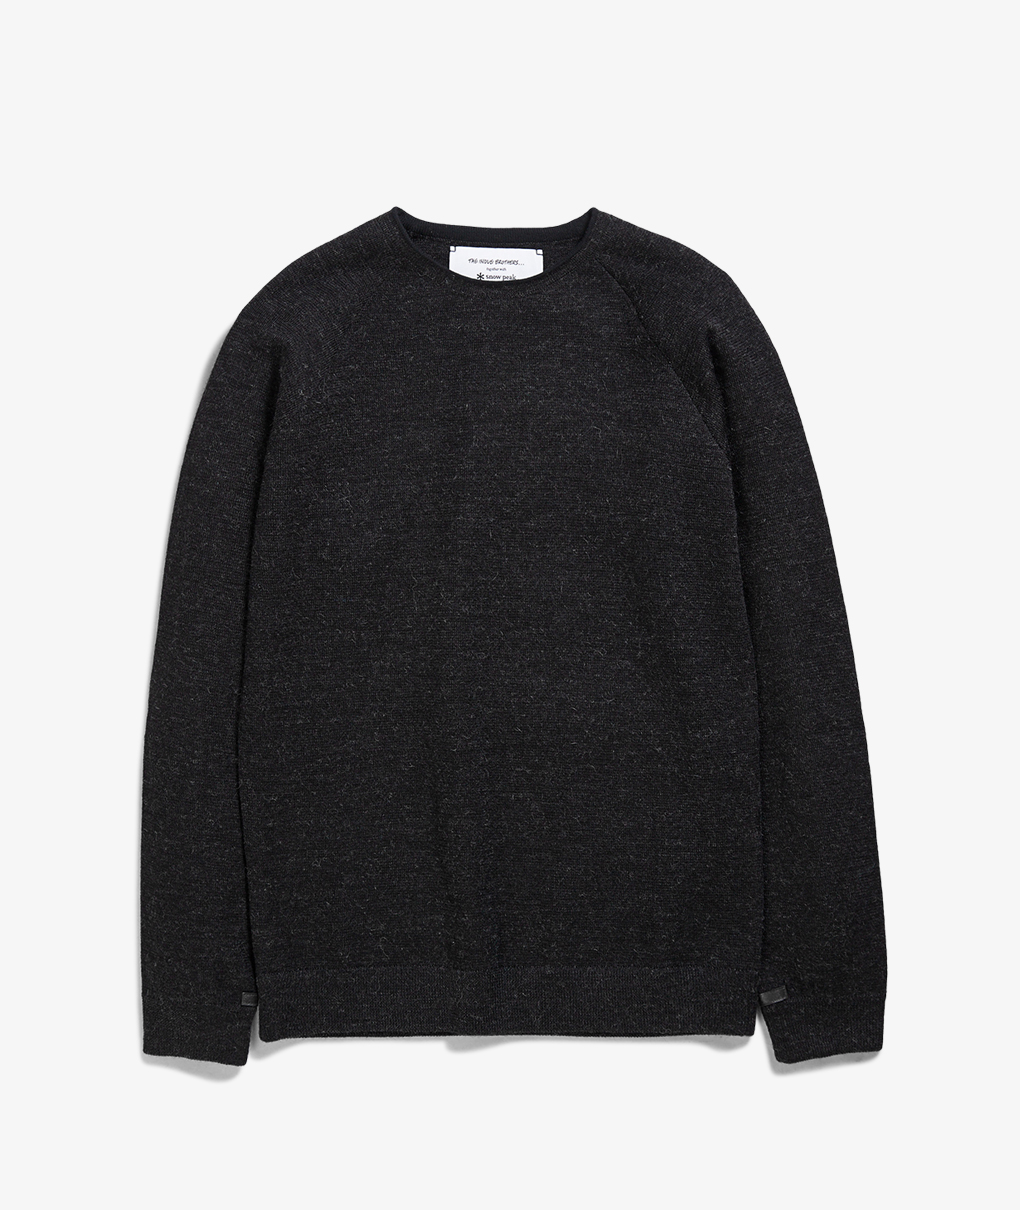 Norse Store Shipping Worldwide Snow Peak and the Inoue Brothers Raglan  Crew Neck Knit Sweater Dark Grey